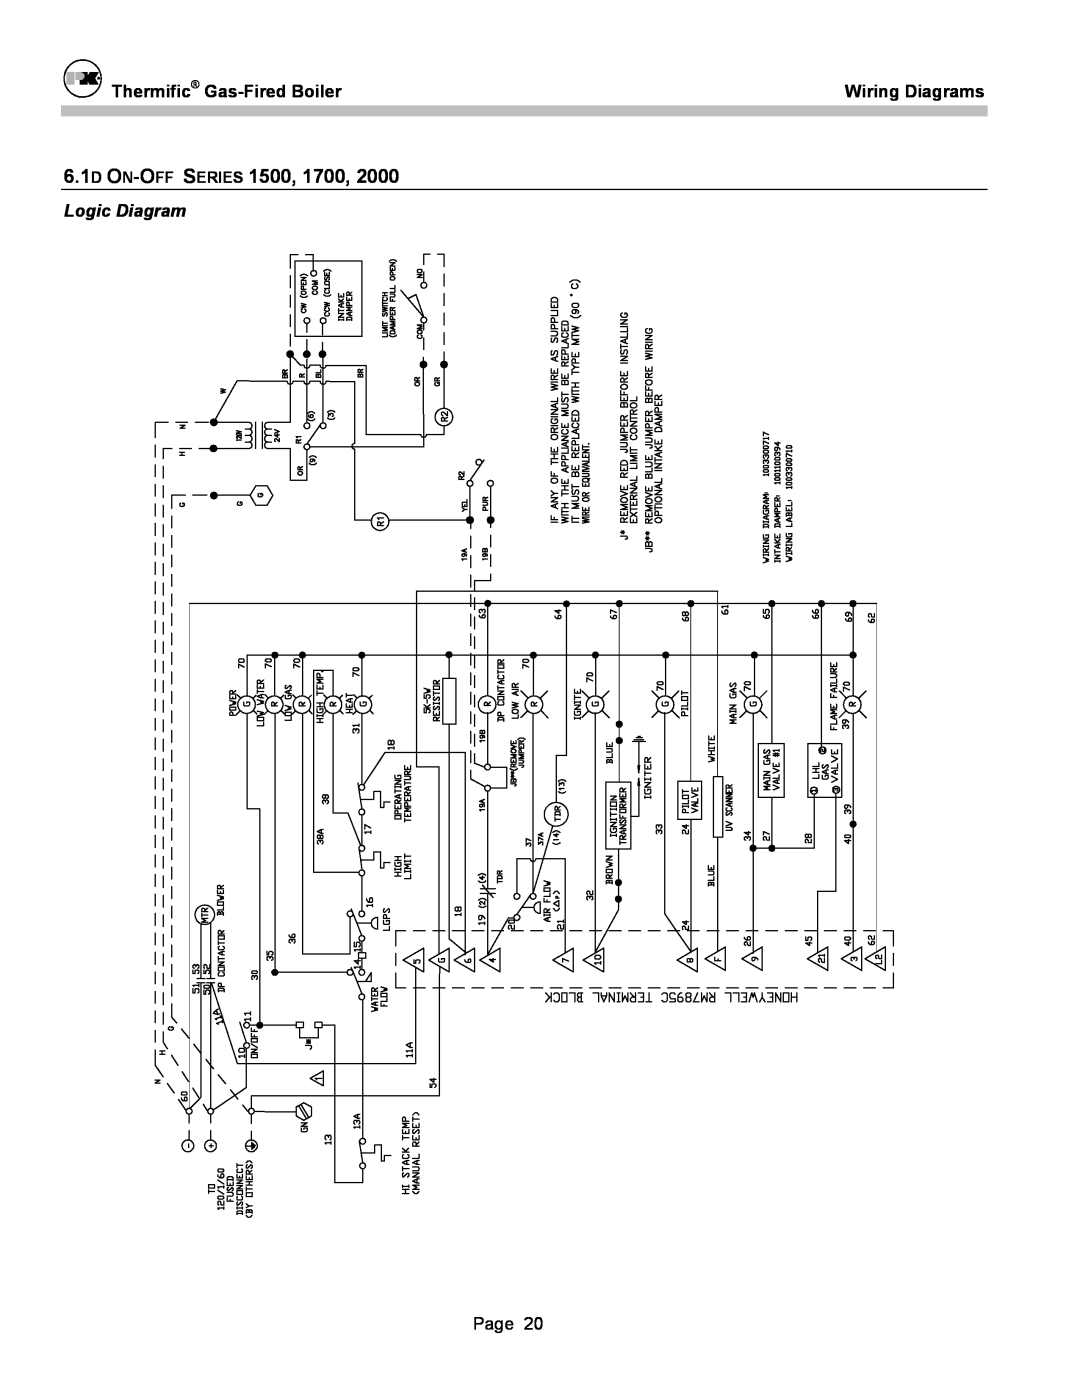 Patterson-Kelley DVSCM-02 owner manual 6.1D ON-OFF SERIES, Thermific Gas-FiredBoiler, Wiring Diagrams, Logic Diagram 